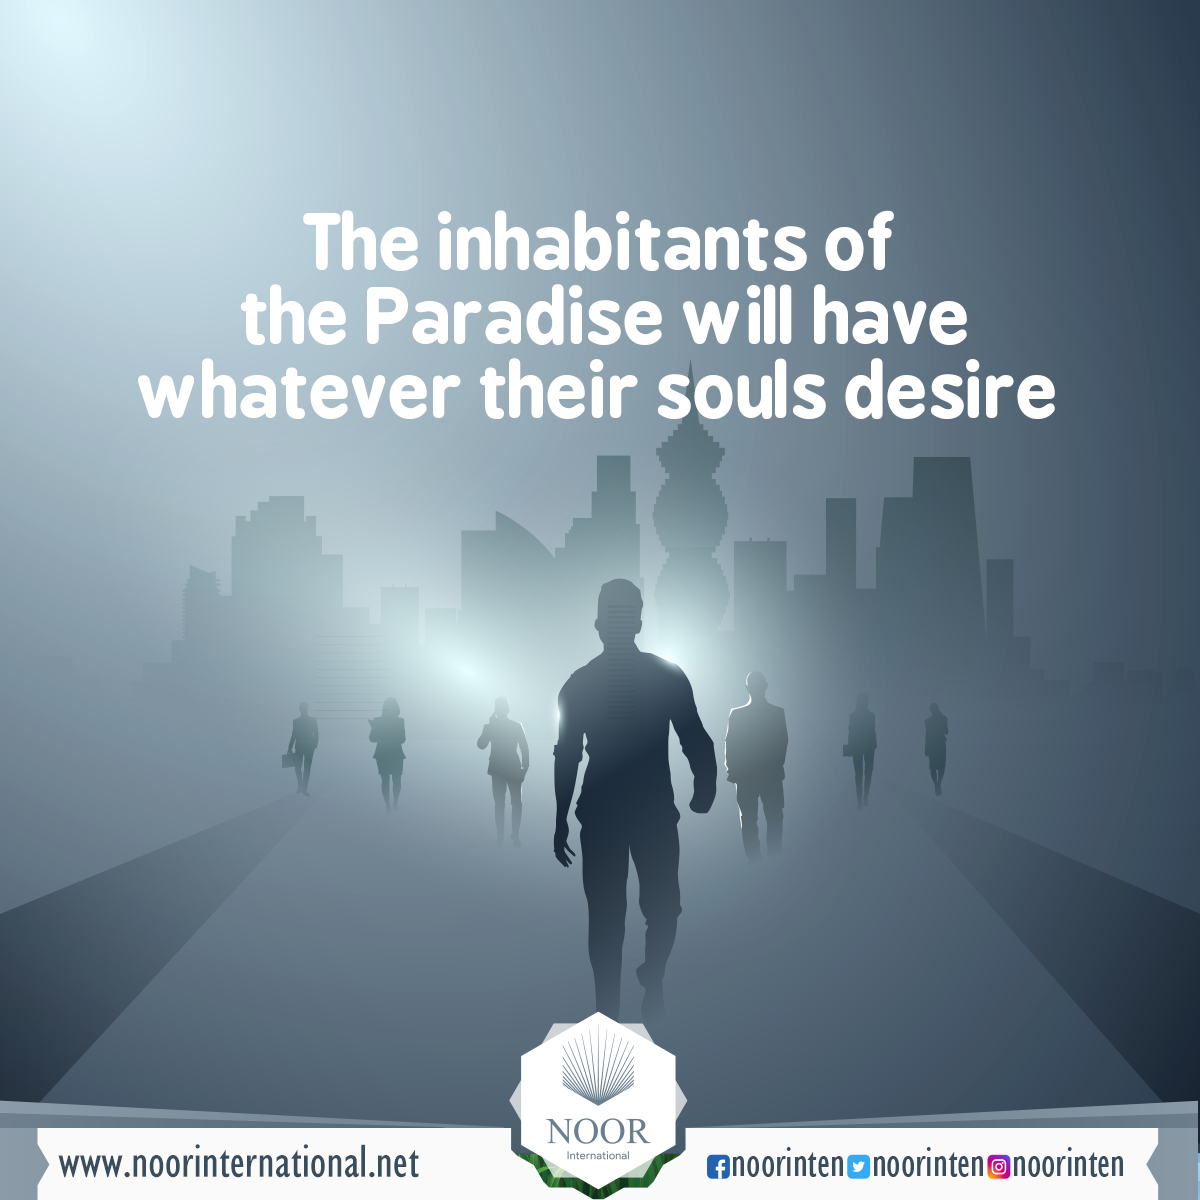 The inhabitants of the Paradise will have whatever their souls desire